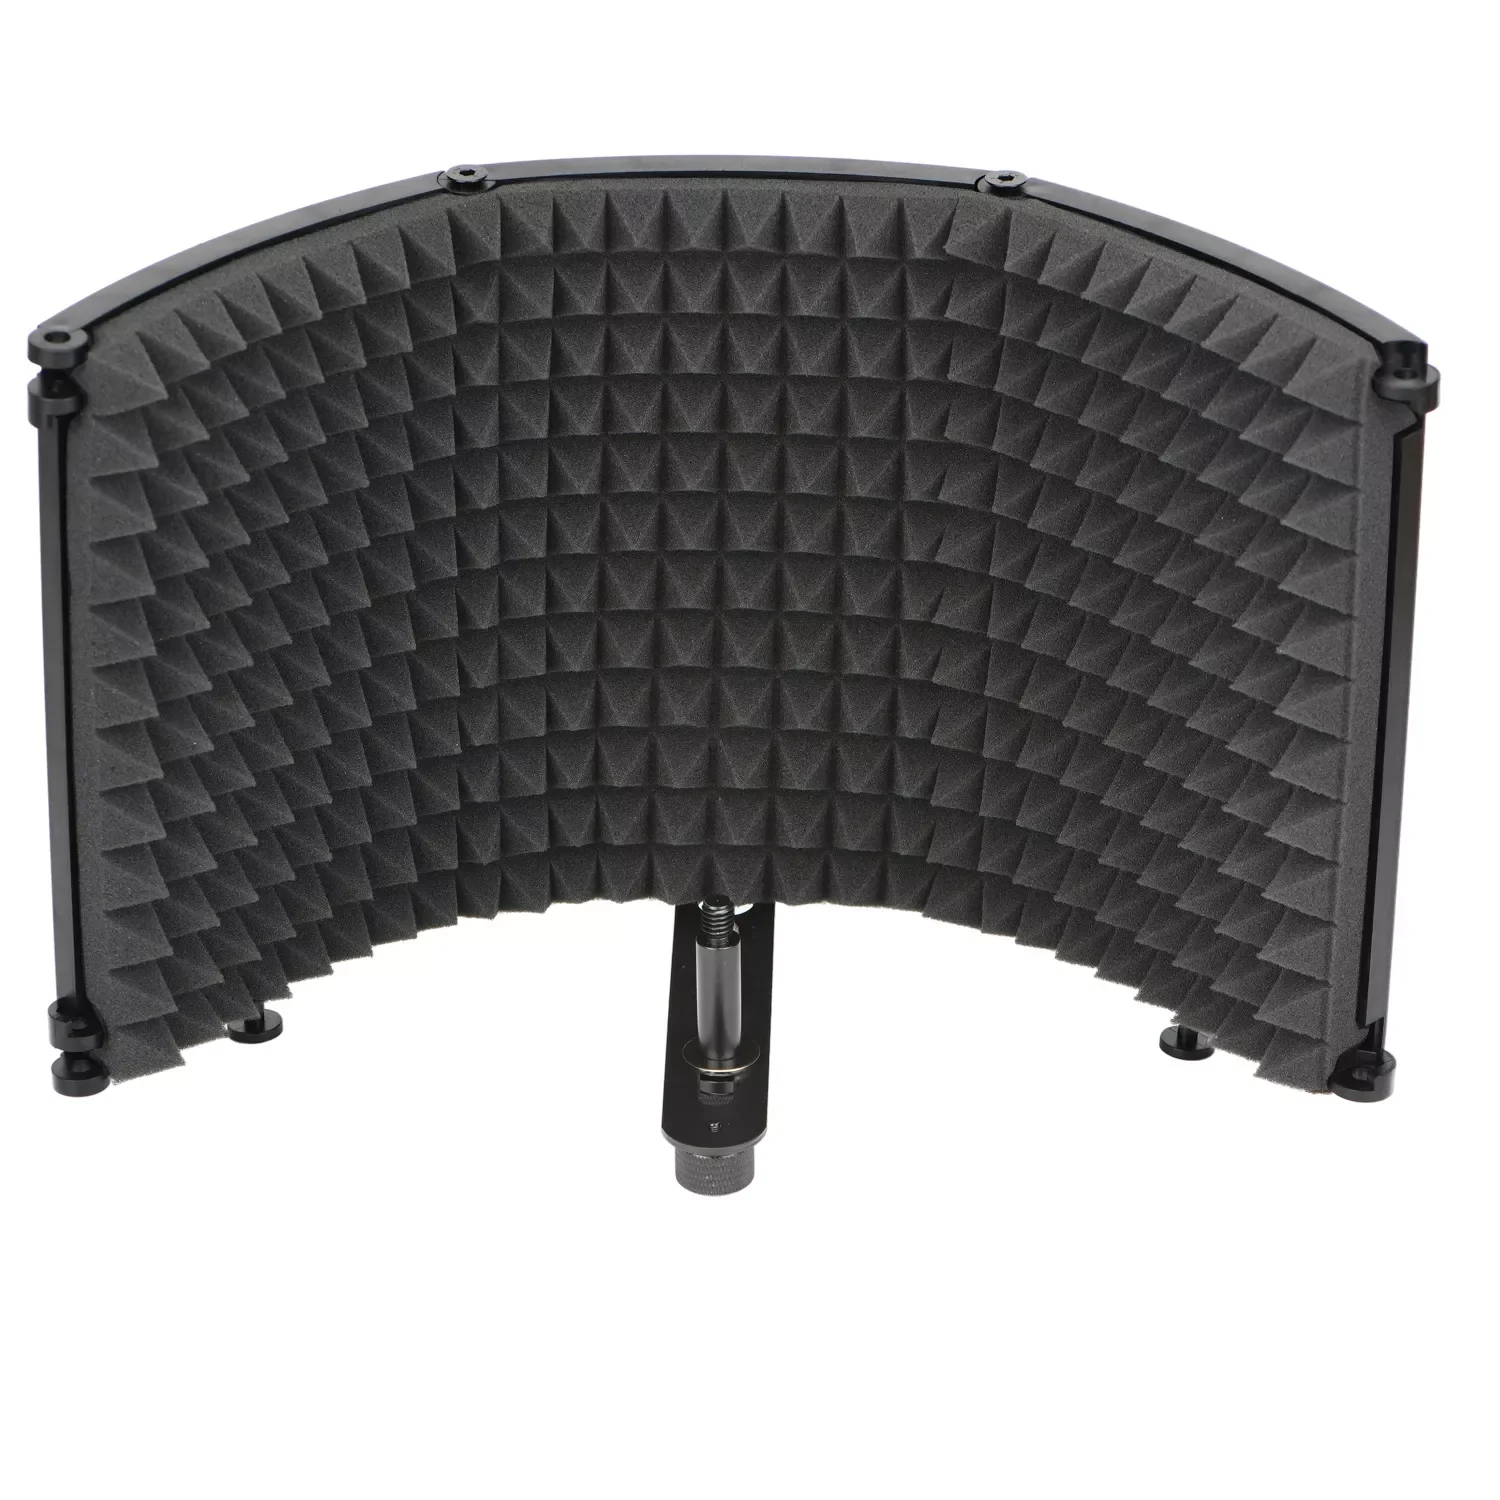 

FREEBOSS Microphone Windscreen Shield 3/5 Panel Foldable Absorbing Acoustic Isolation Screen Foam for Broadcast Record FB-PS68